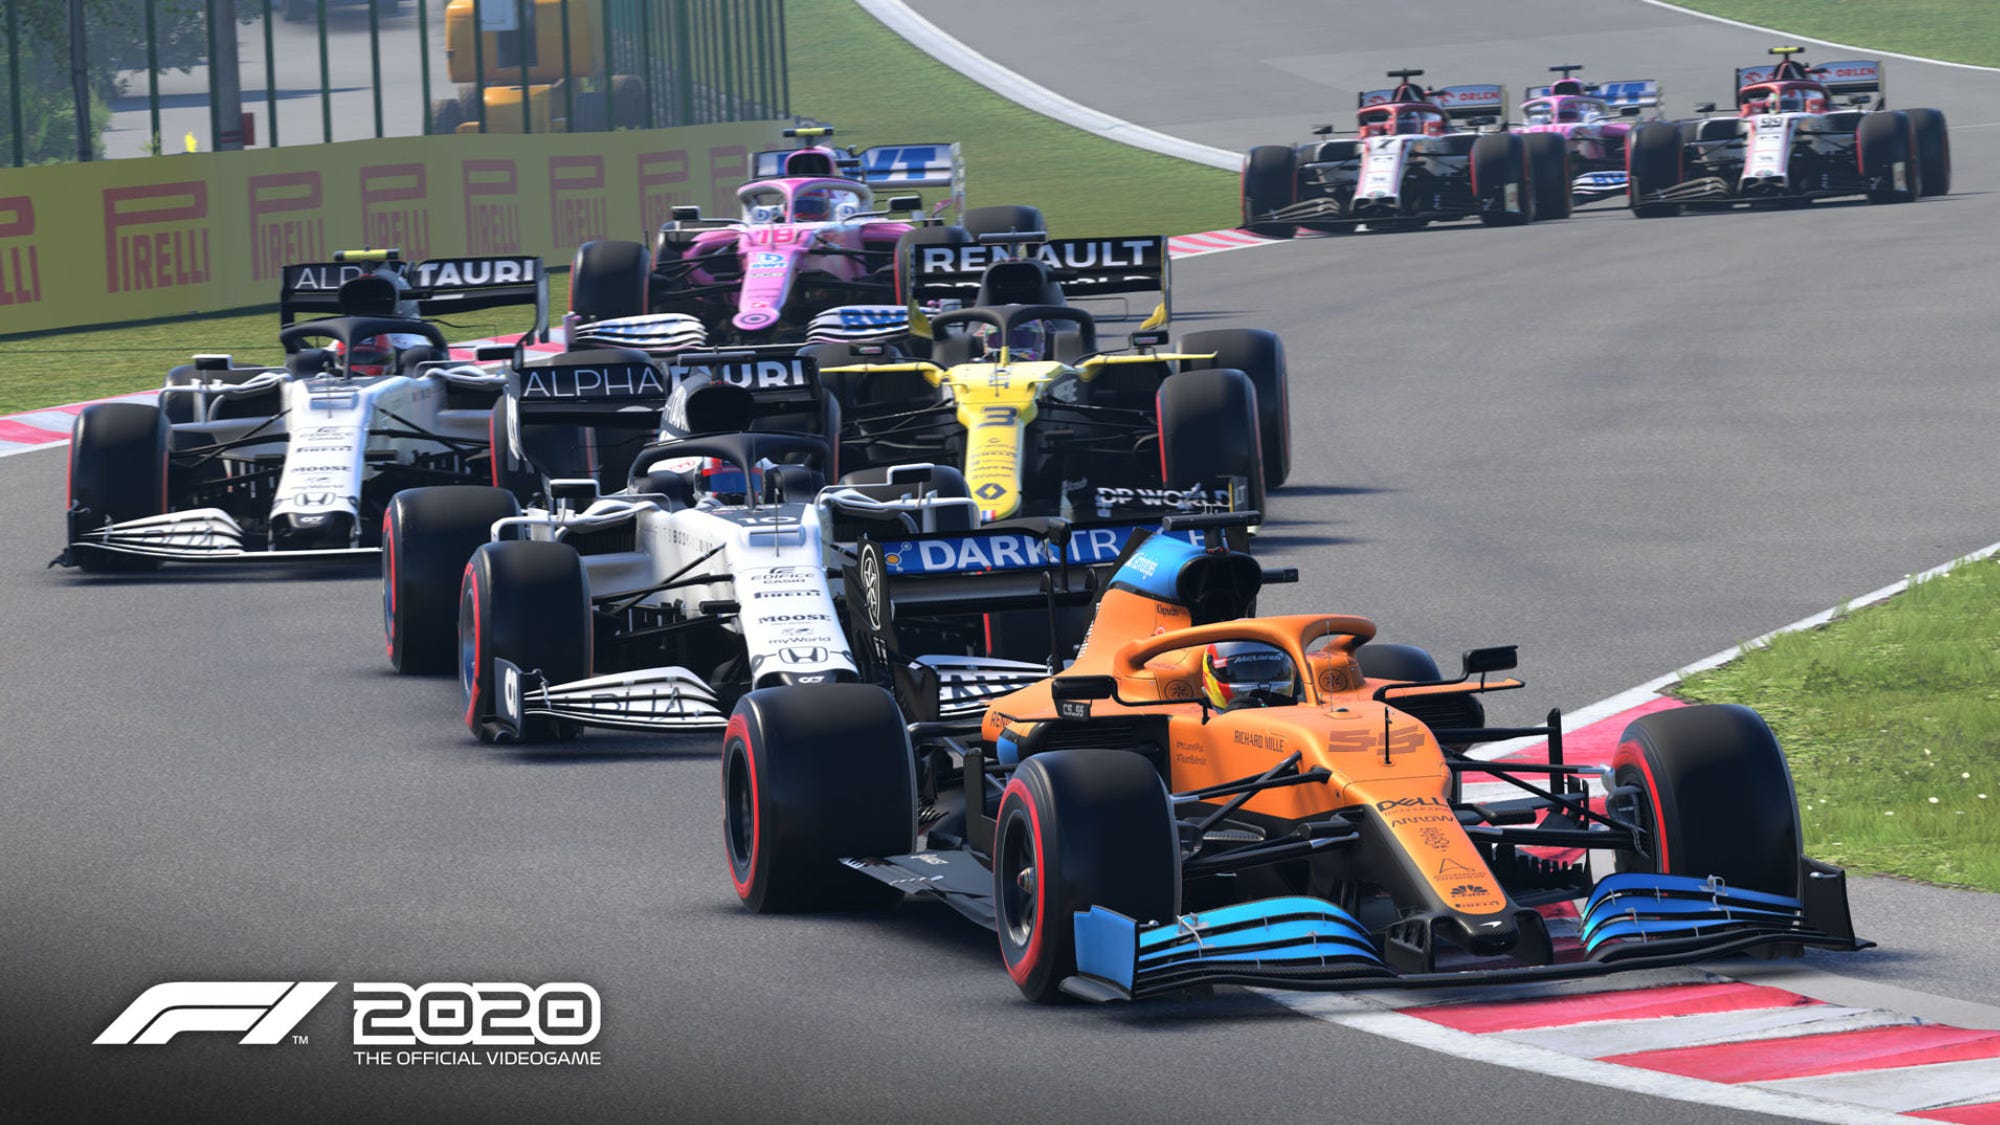 F1 2020 is a masterful racing game, by J. King, Casual Rambling